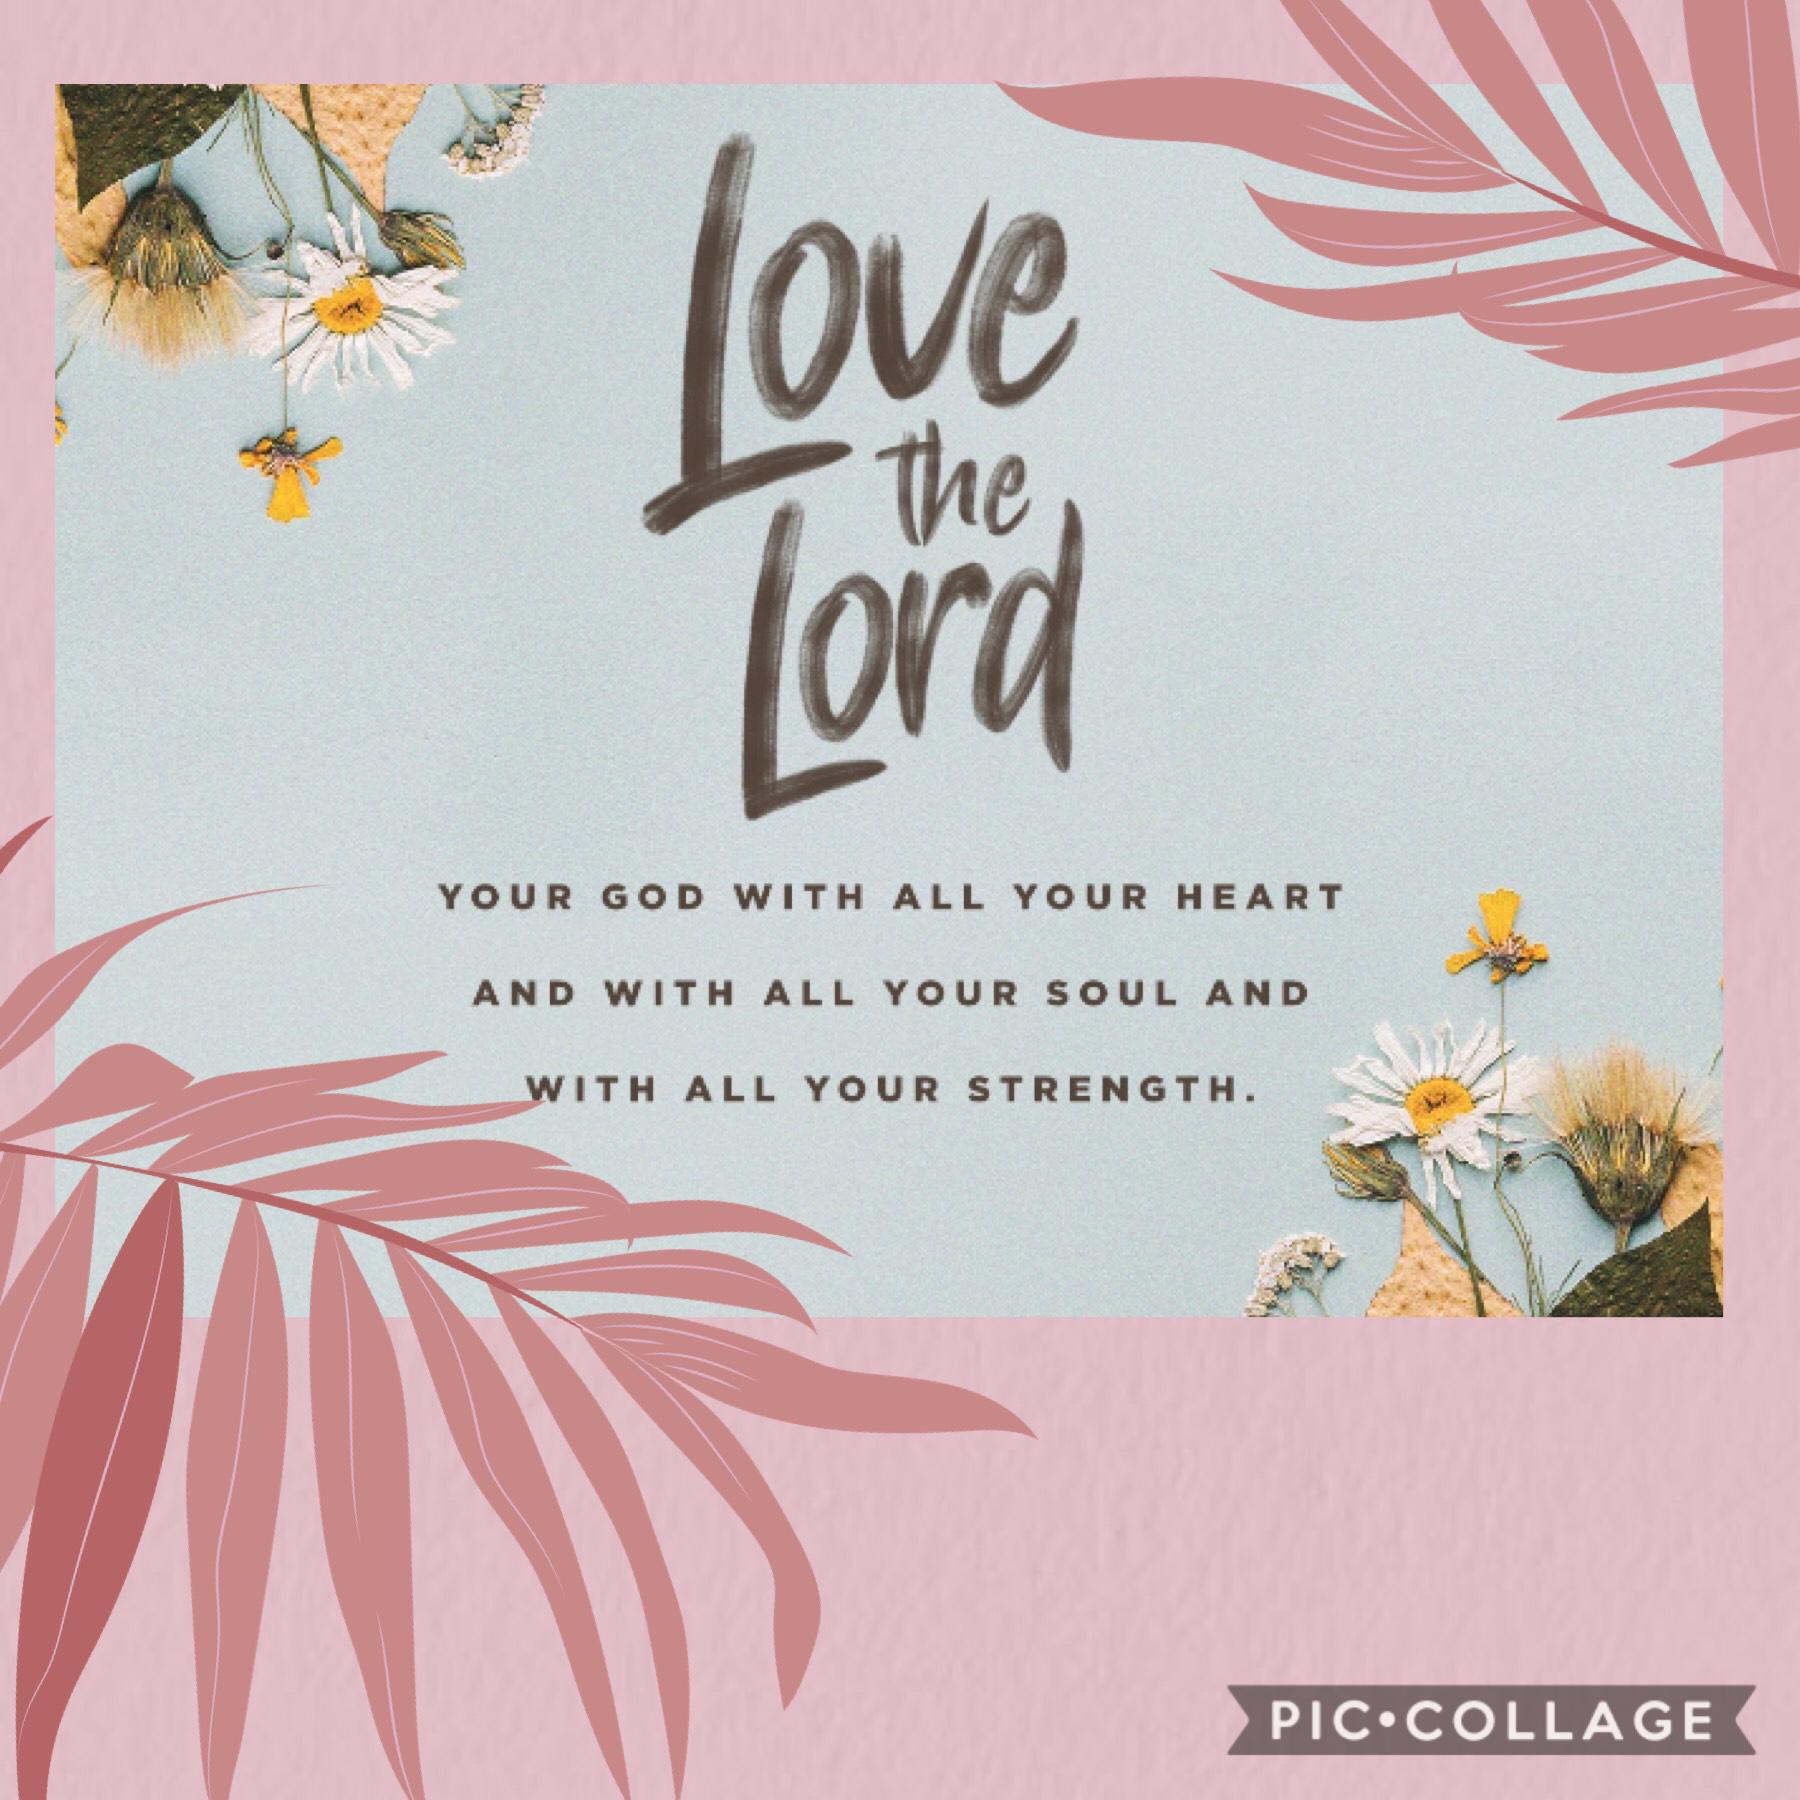 Bible verse of the Day!!